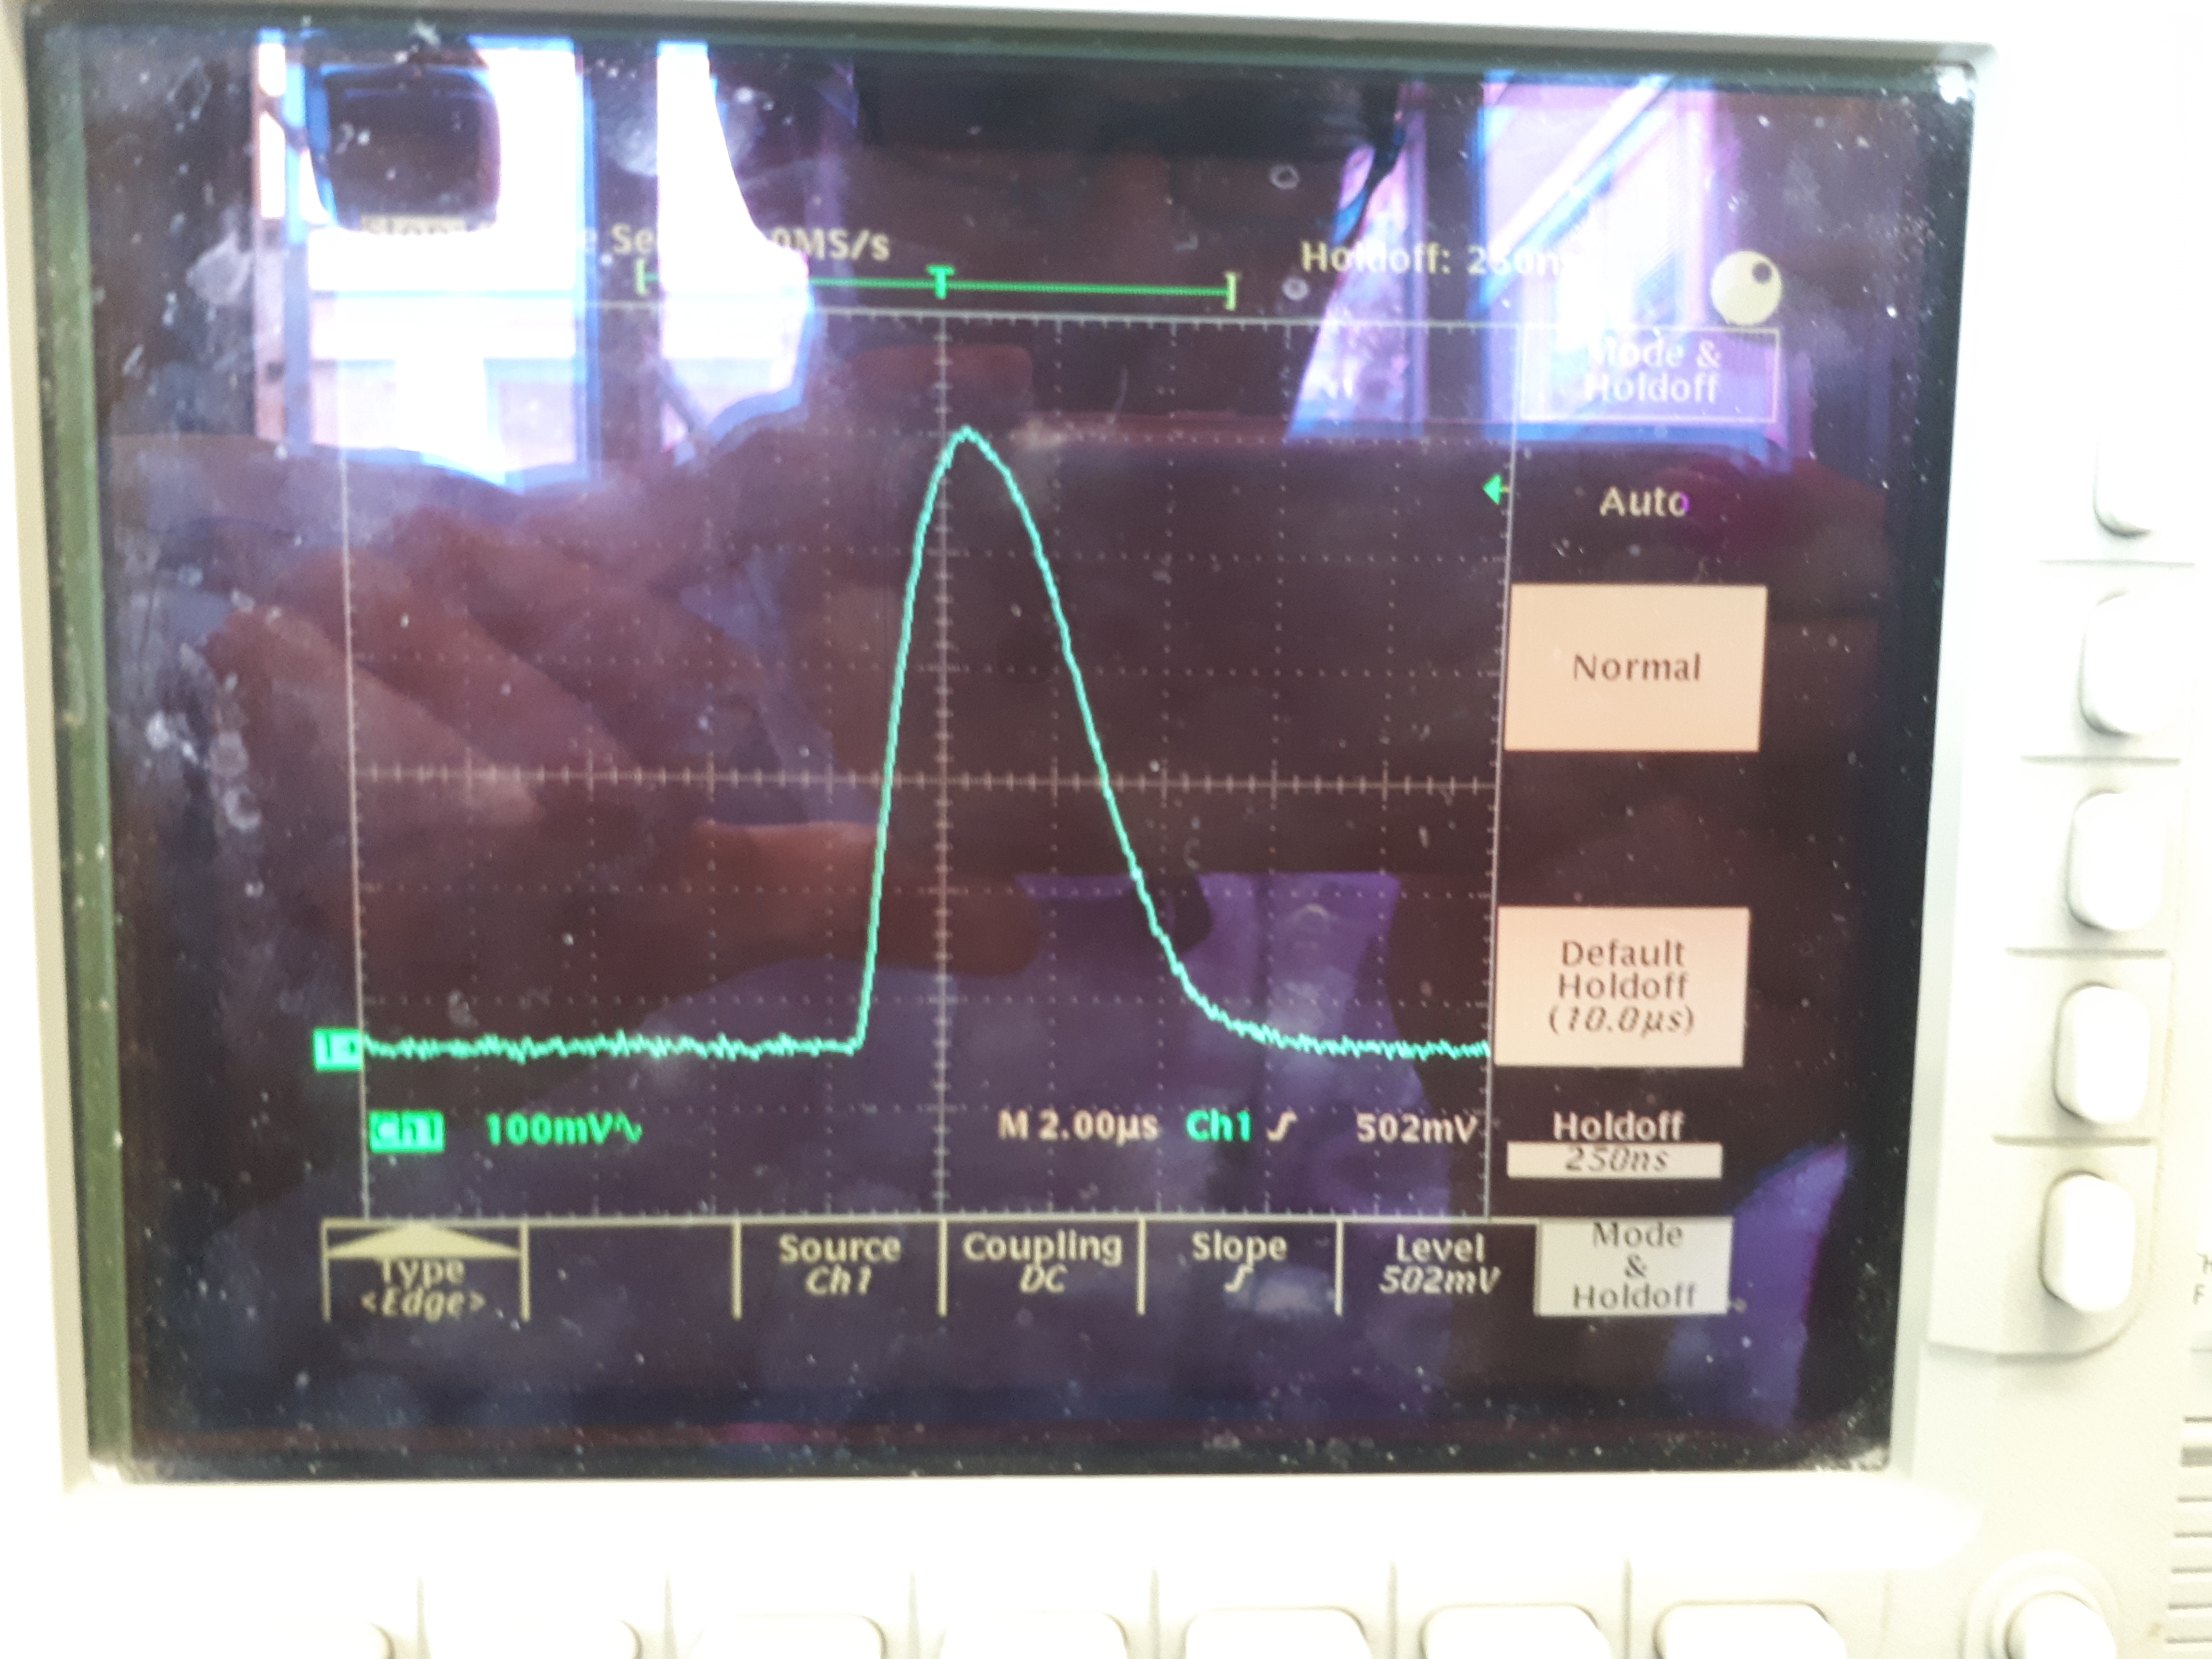 A signal pulse from a single SiPM